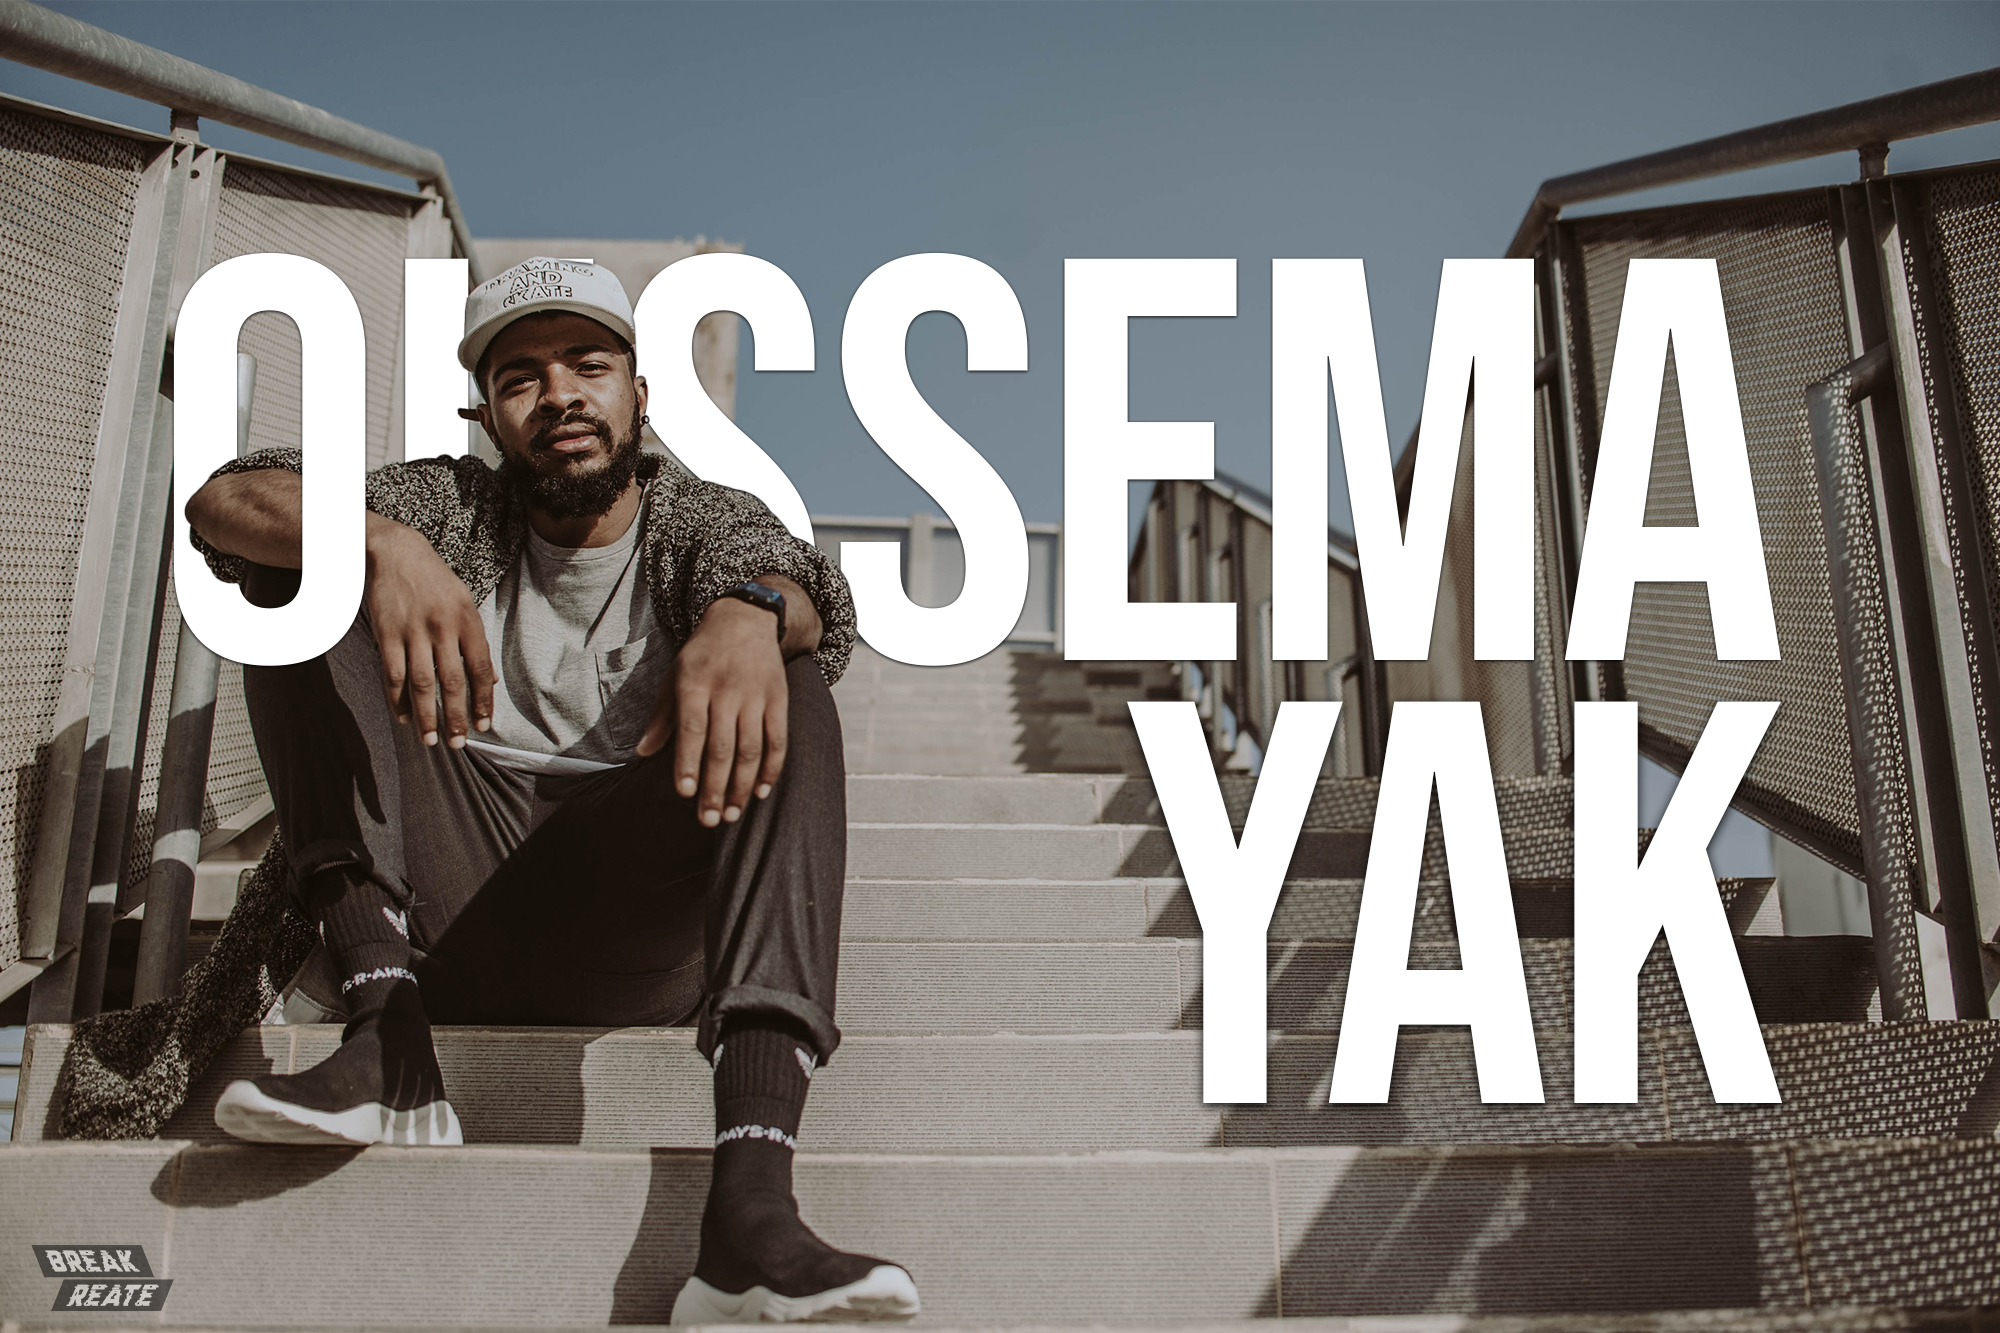 You are currently viewing Oussema Chouchene aka YAK: Creative Freedom Within Hip-hop